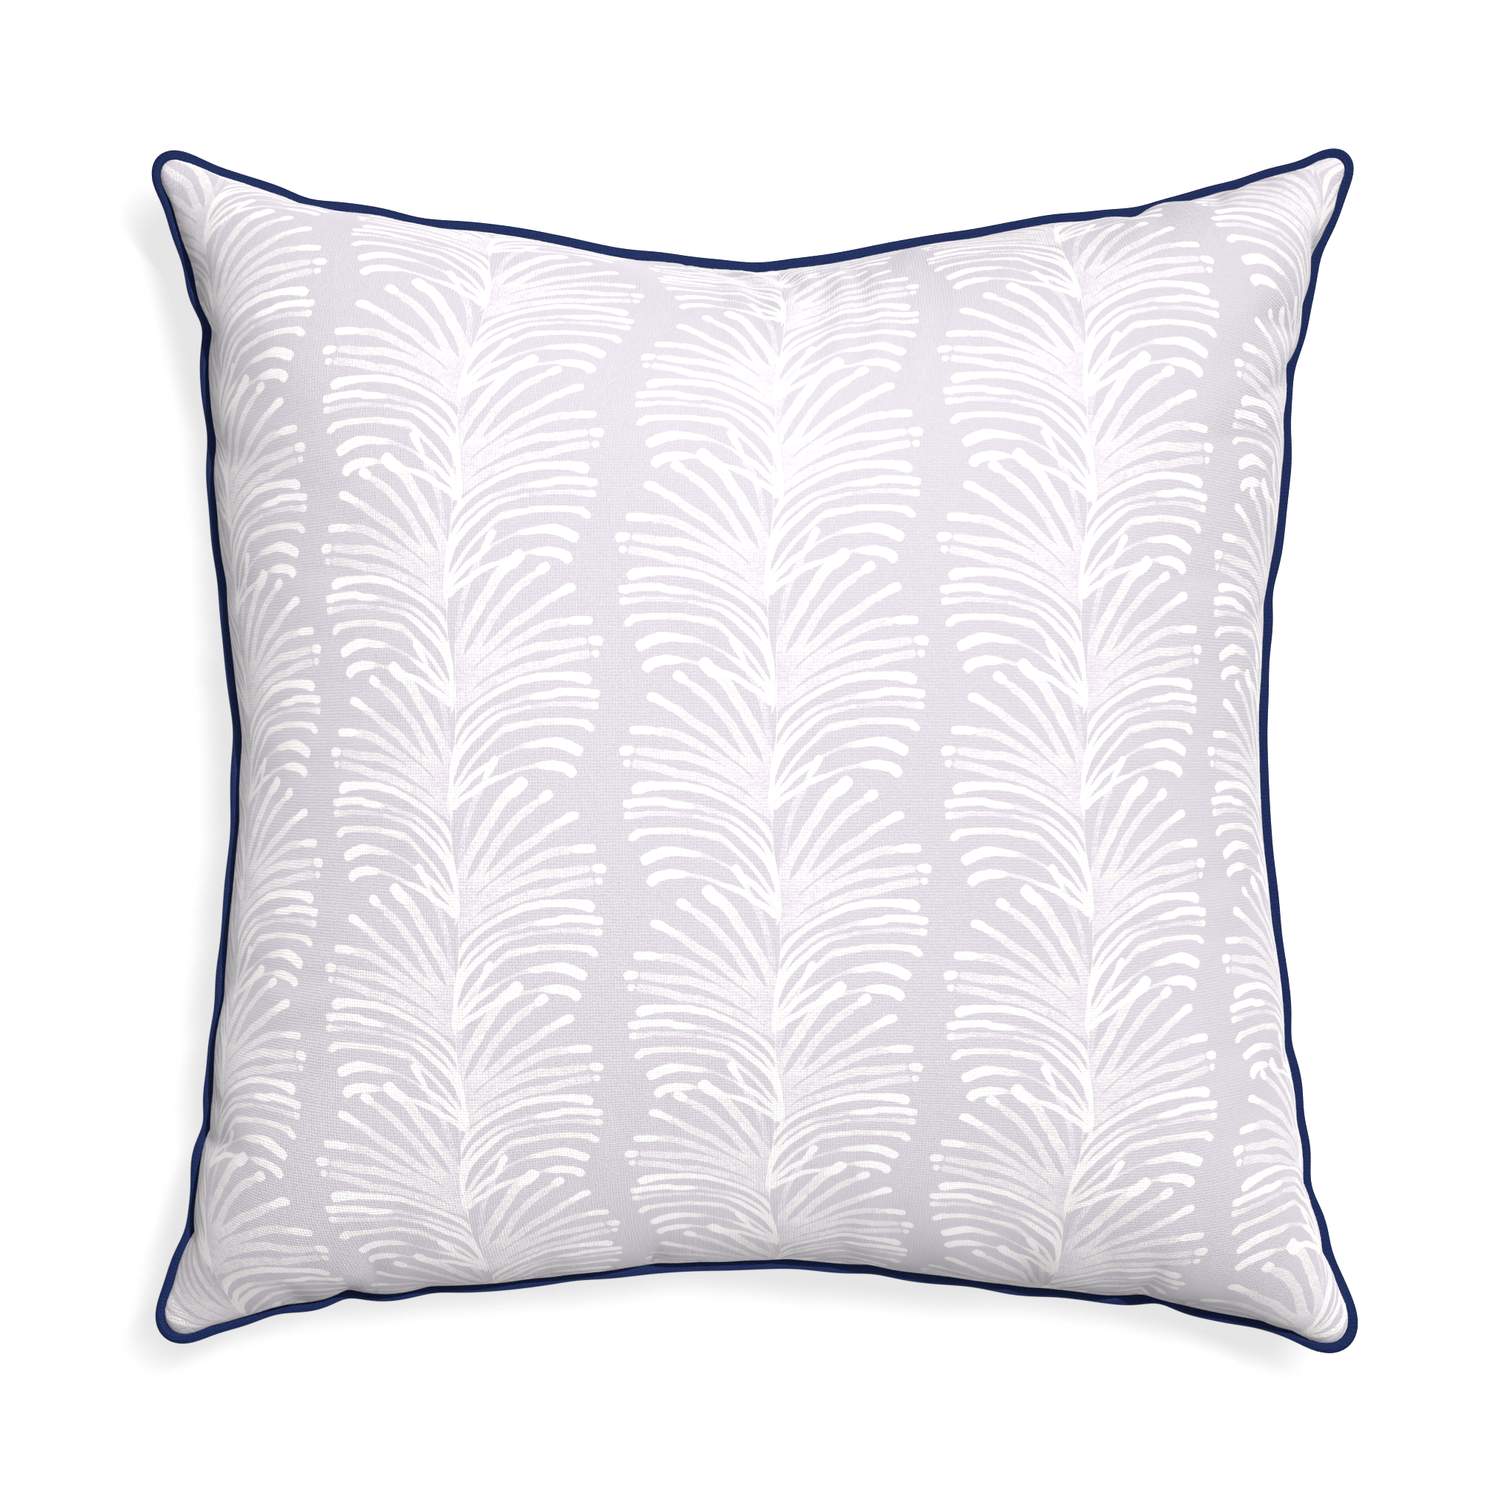 Euro-sham emma lavender custom pillow with midnight piping on white background